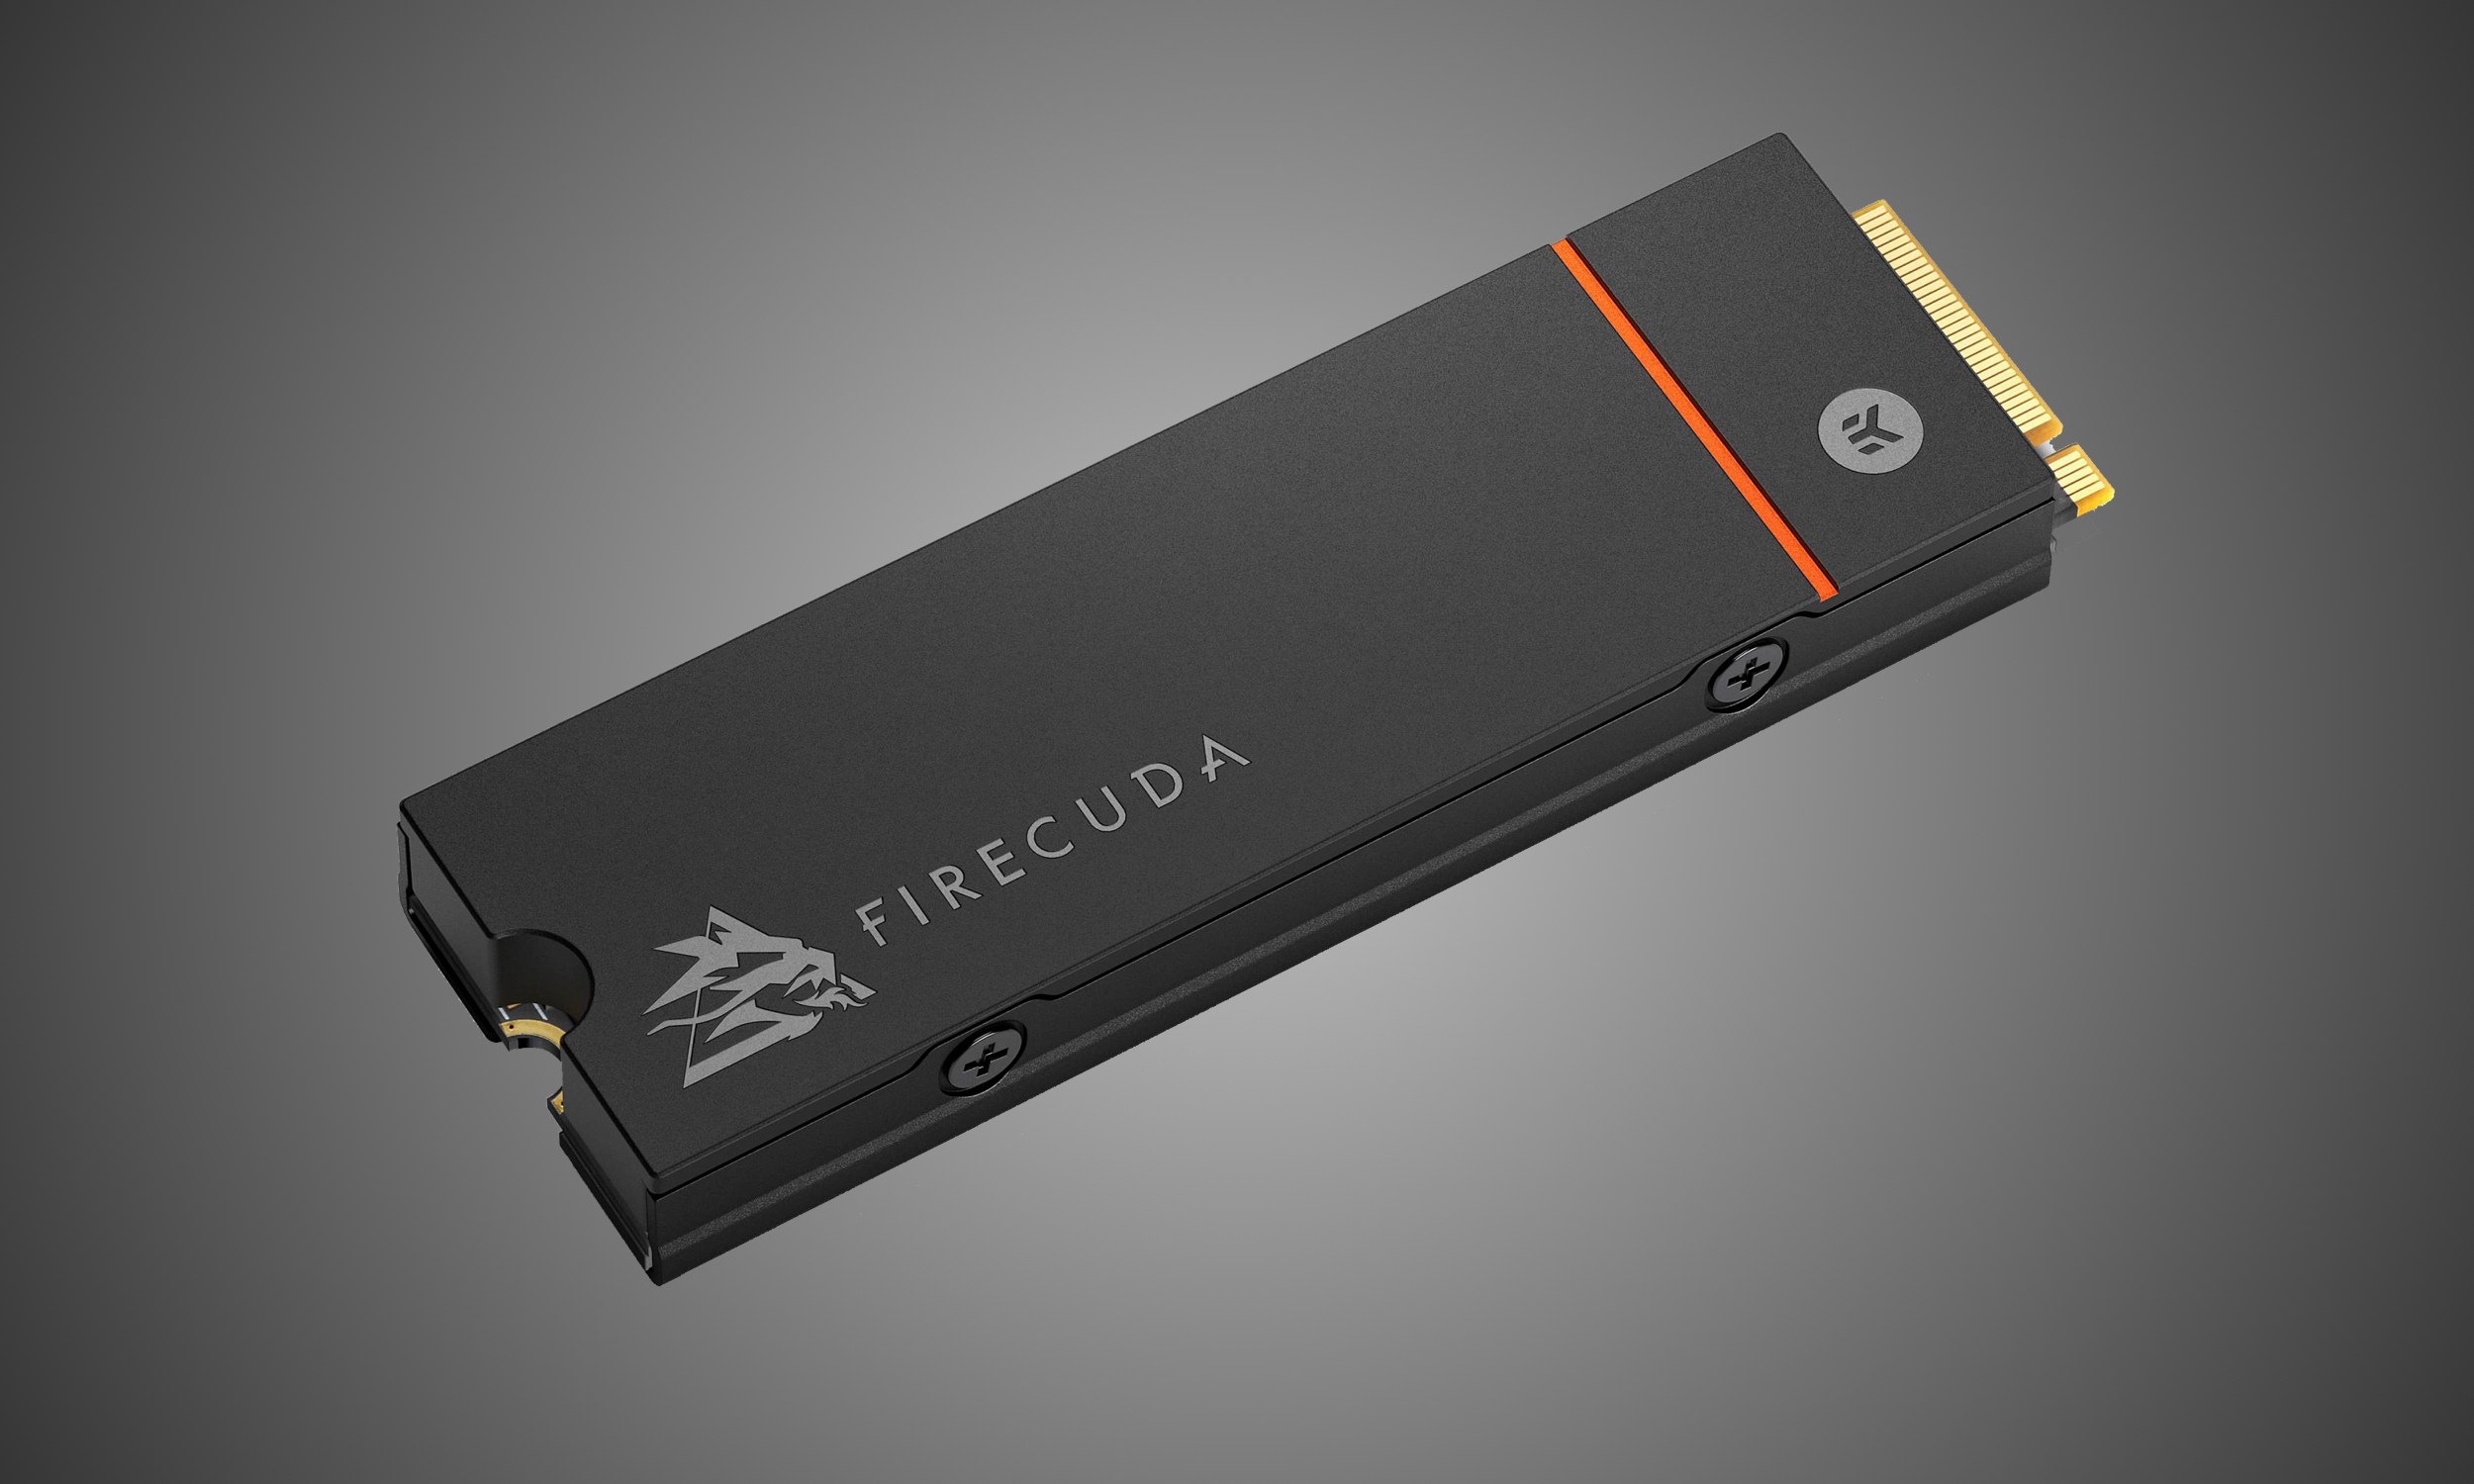 Seagate Launches Its New FireCuda 530 Gaming SSDs